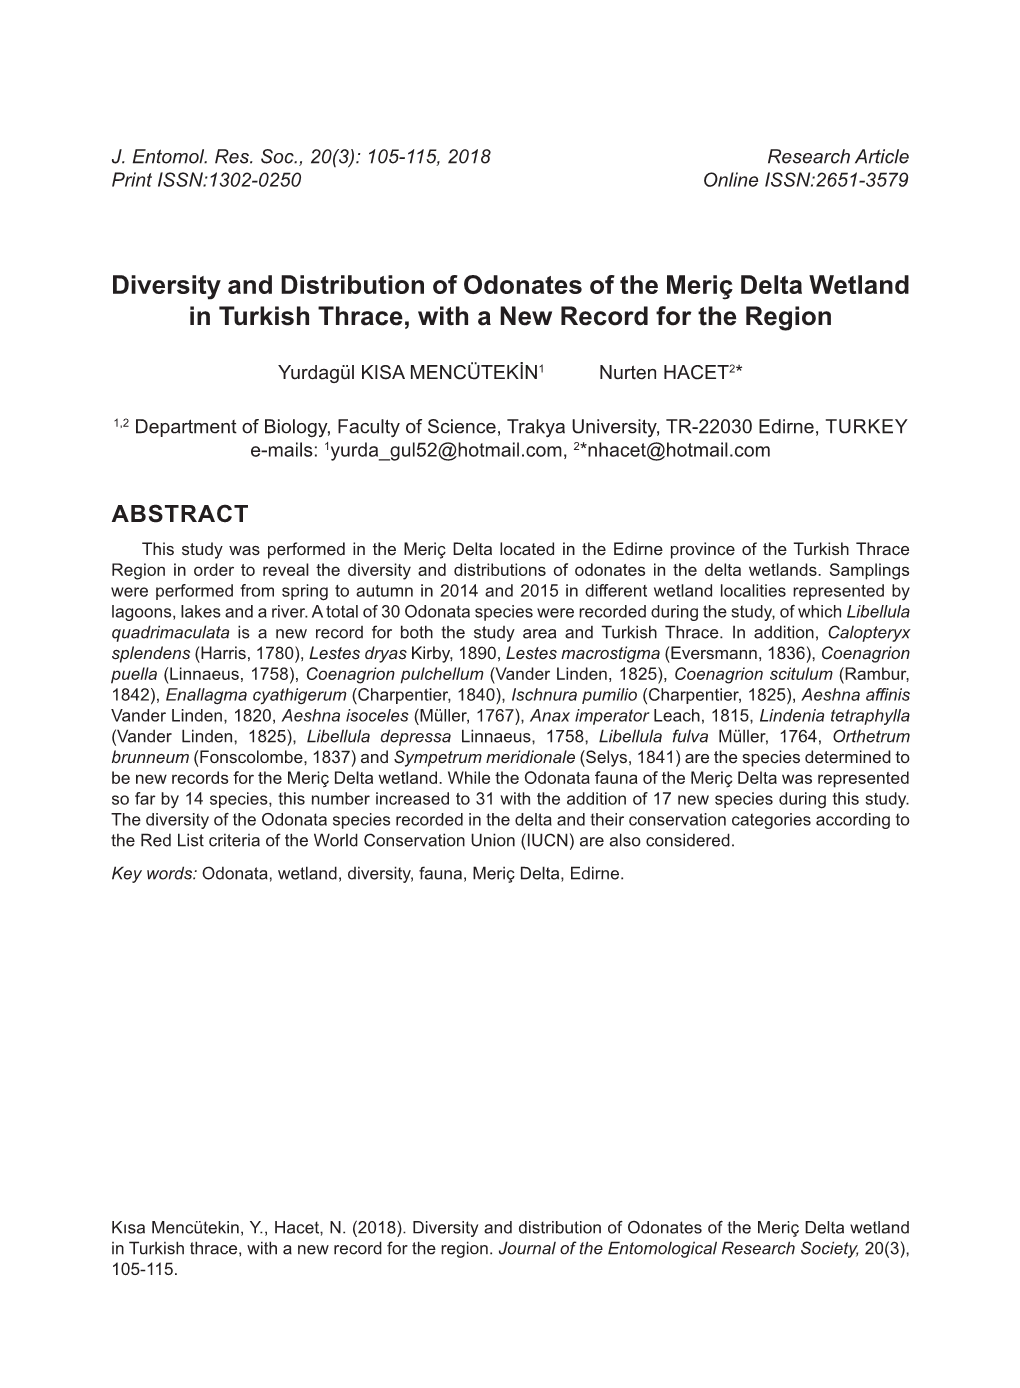 Diversity and Distribution of Odonates of the Meriç Delta Wetland in Turkish Thrace, with a New Record for the Region